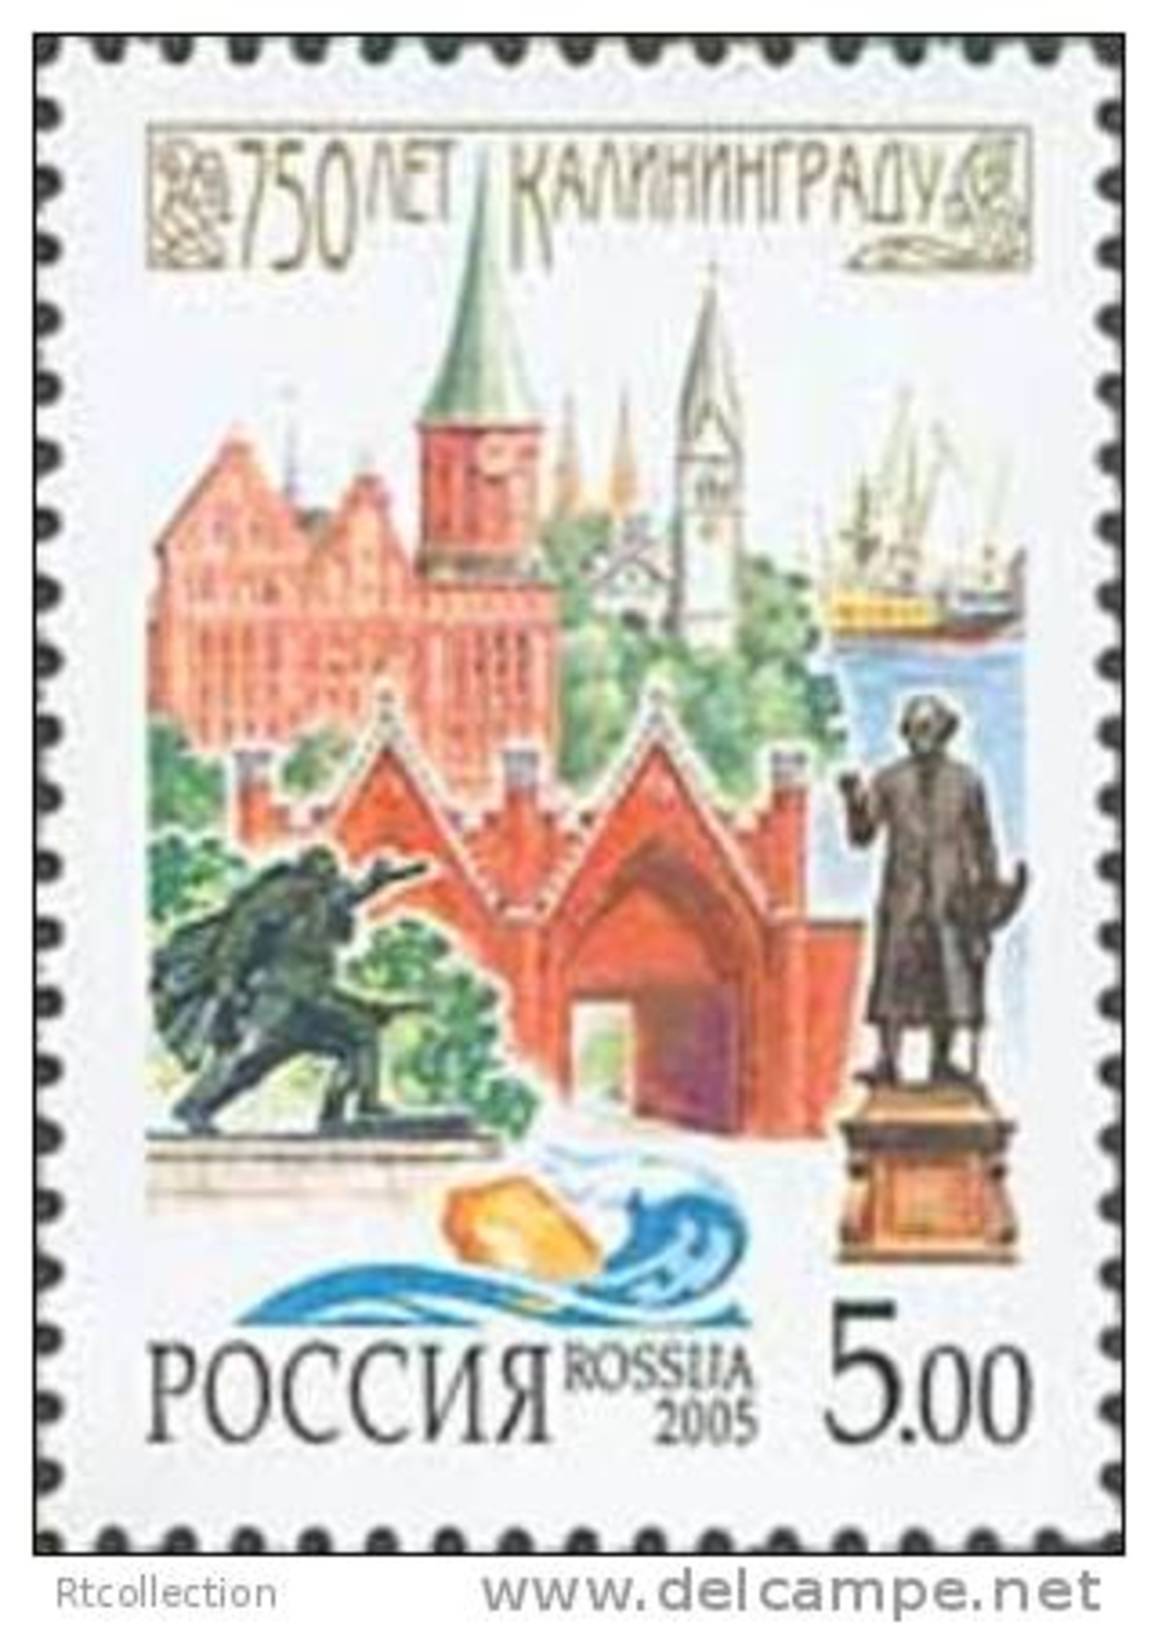 Russia 2005 Kaliningrad 750th Anni Architecture Monuments Building Regions Geography Place Stamp Michel 1271 Scott 6913 - Unused Stamps